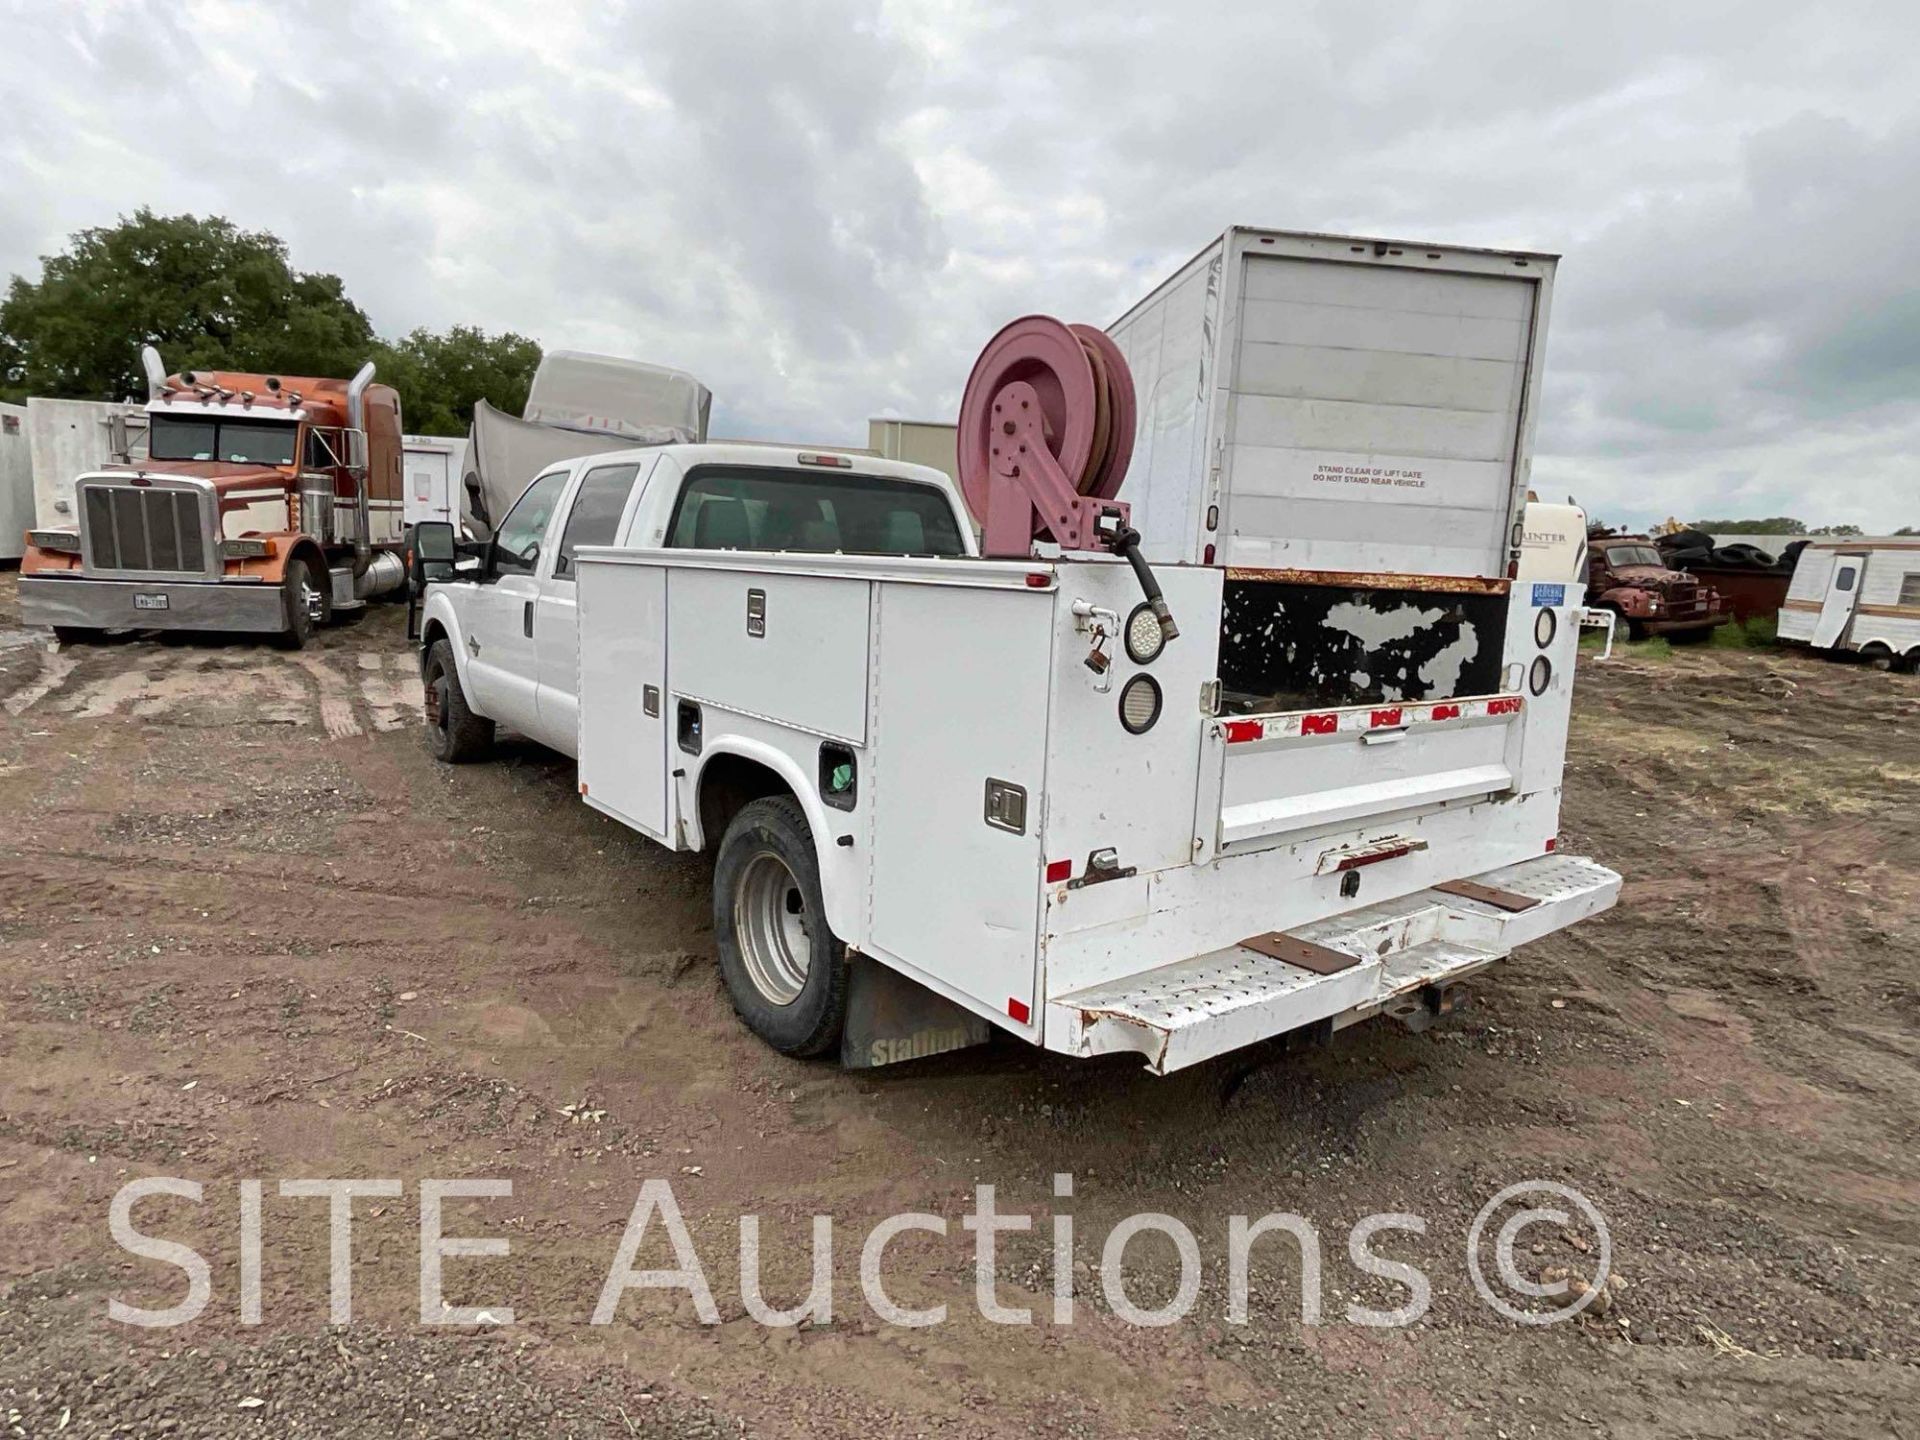 2013 Ford F350 SD Crew Cab Service Truck - Image 8 of 22